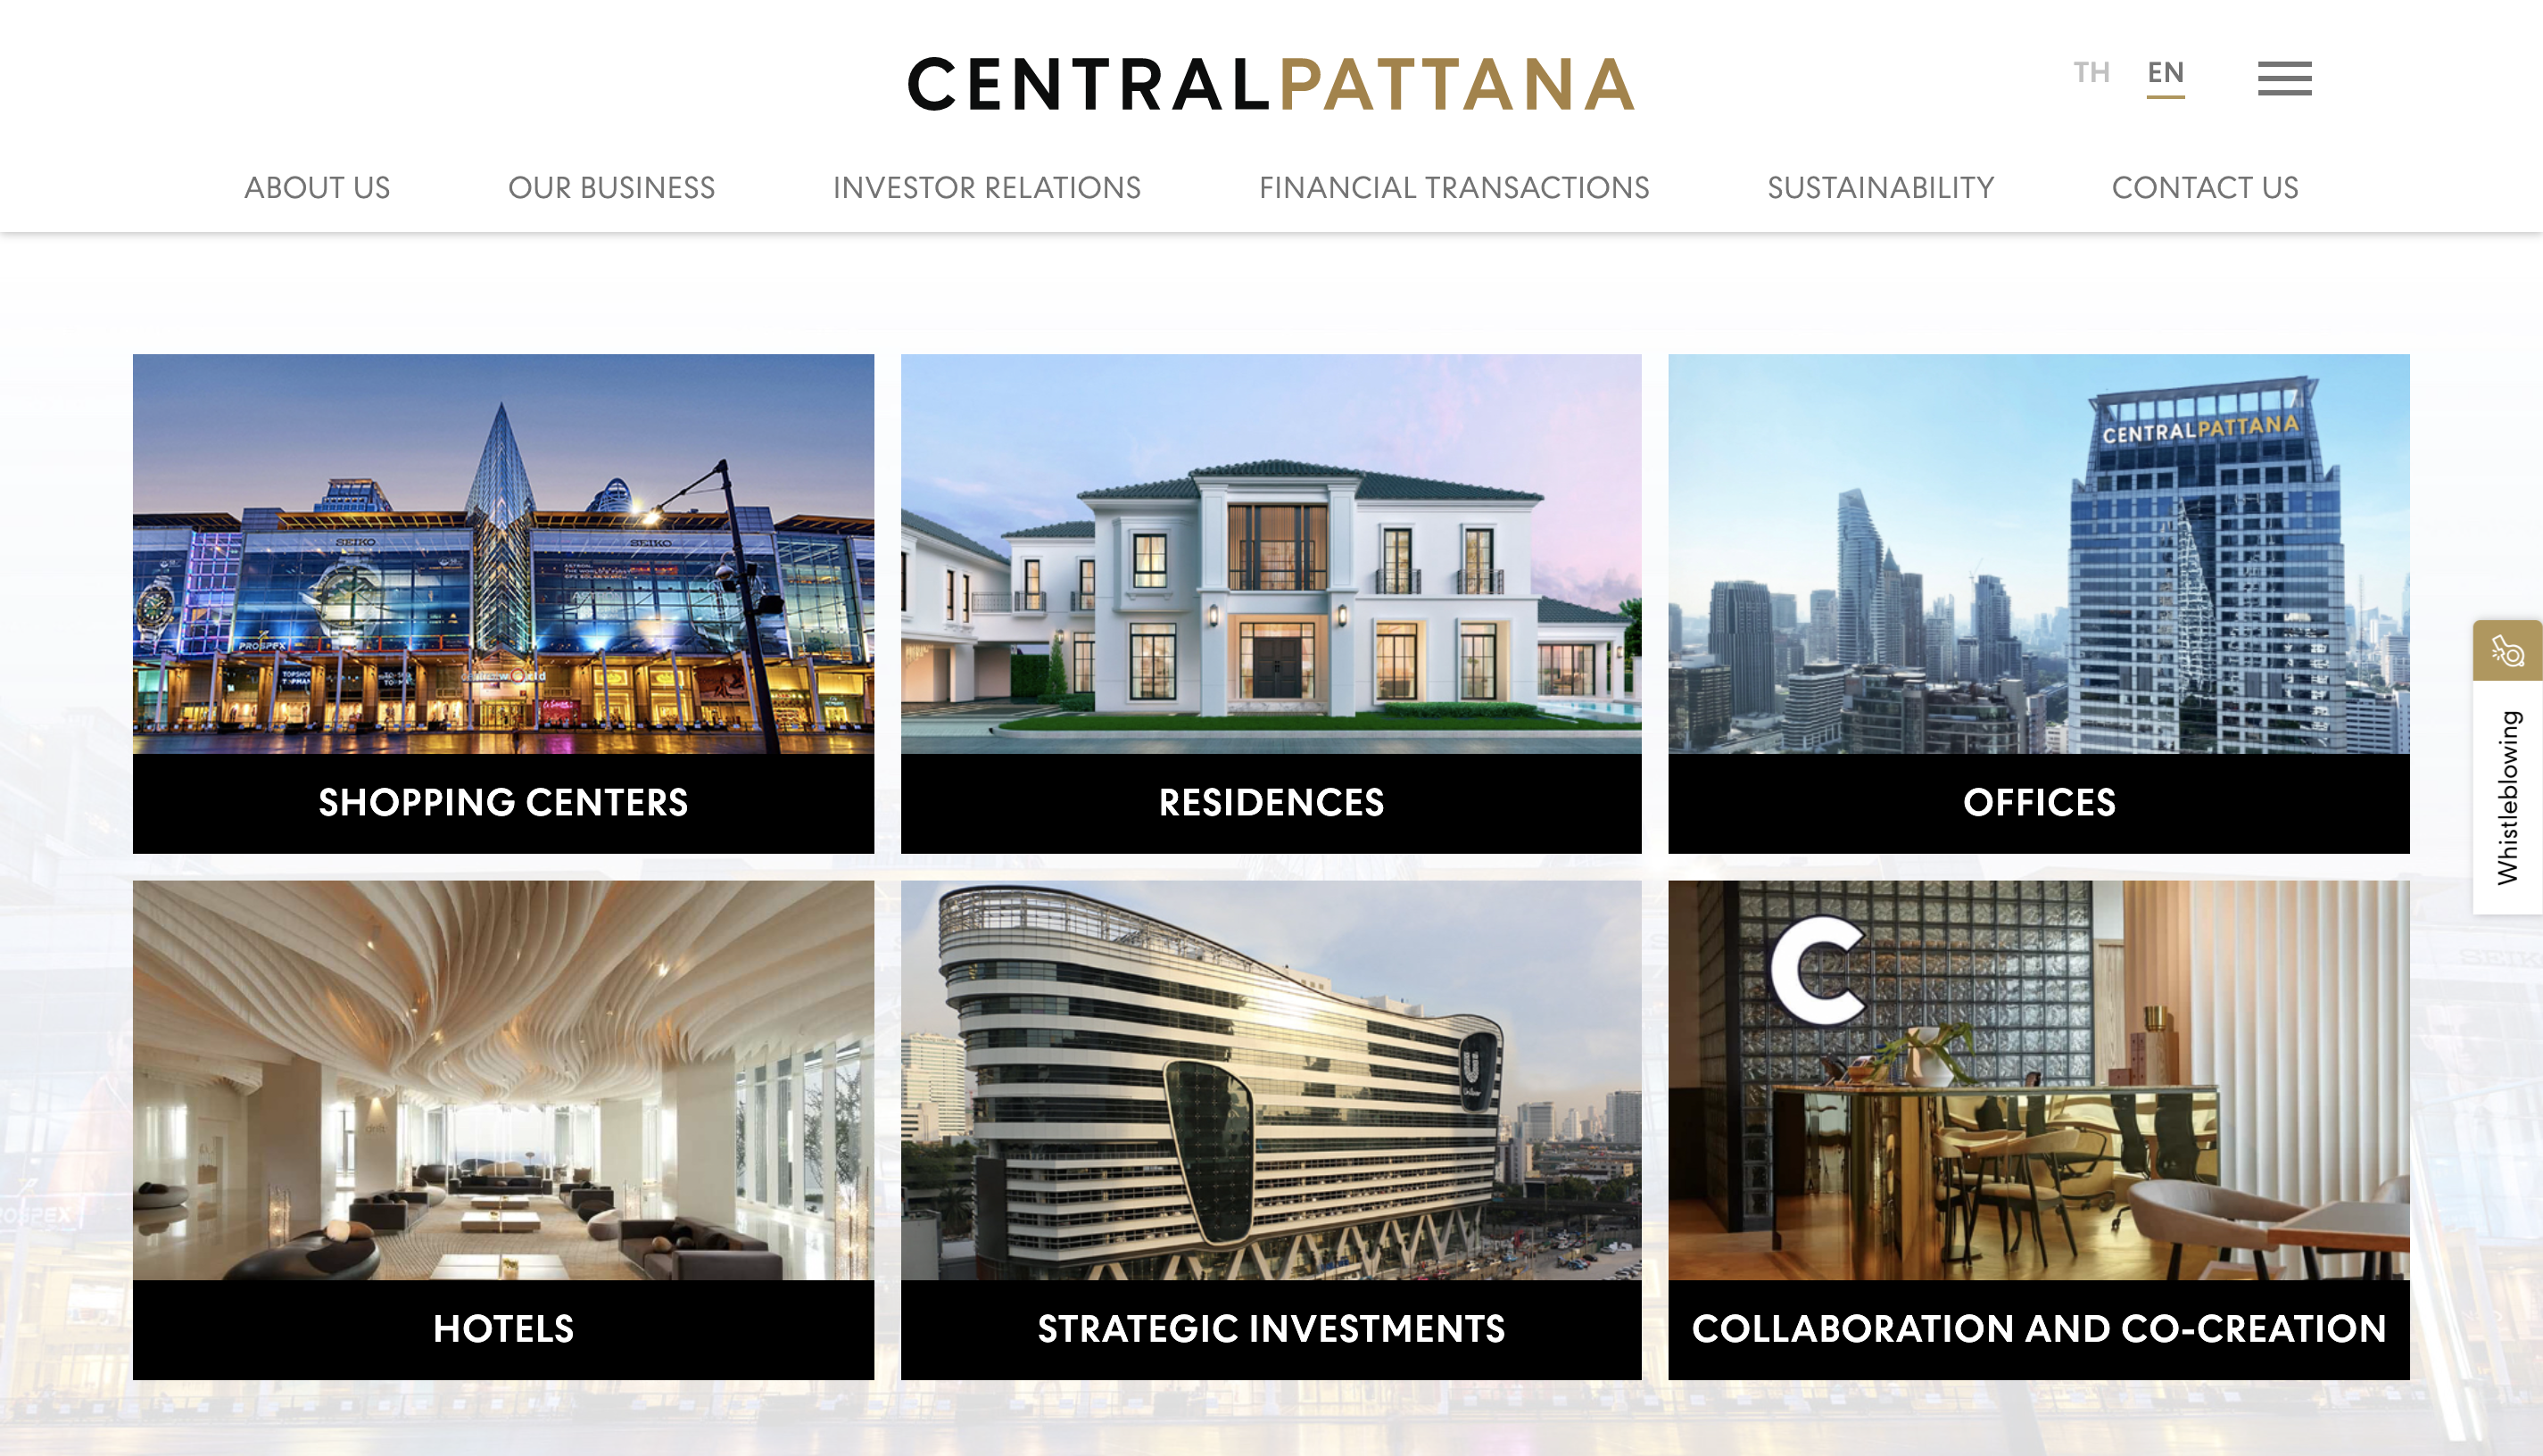 Thai Real Estate and Retail Giant Central Pattana to Invest $3.9 Billion in Mall and Residential Construction over the Next 5 Years